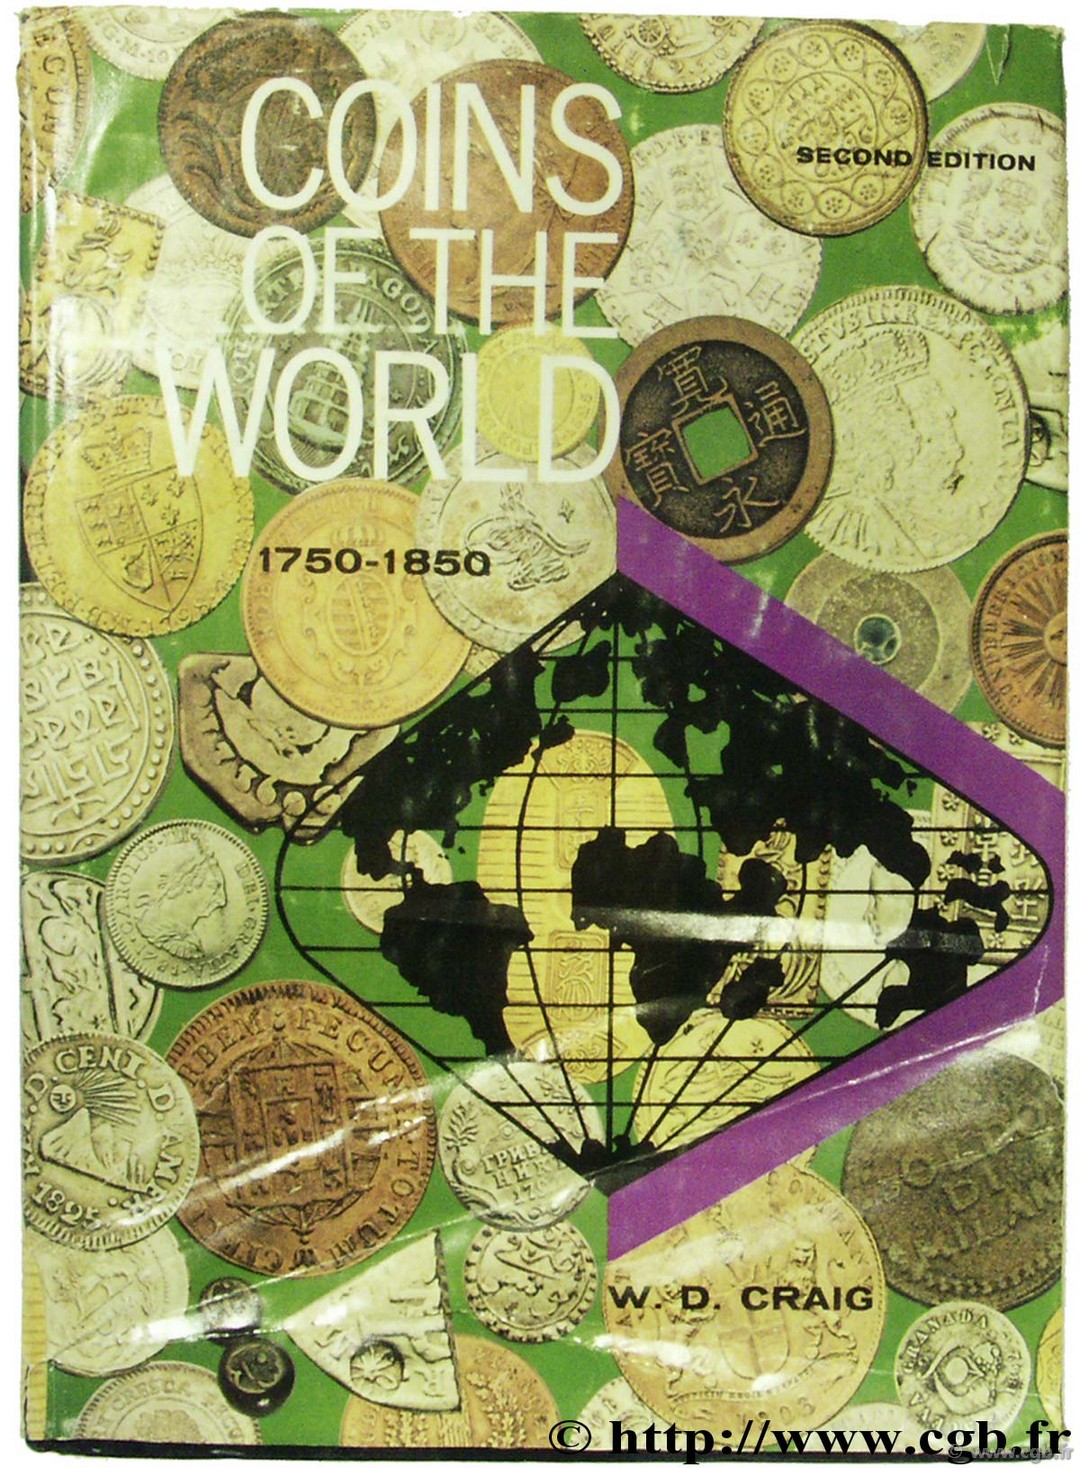 Coins of the World 1750-1850 2nd edition CRAIG W.-D.